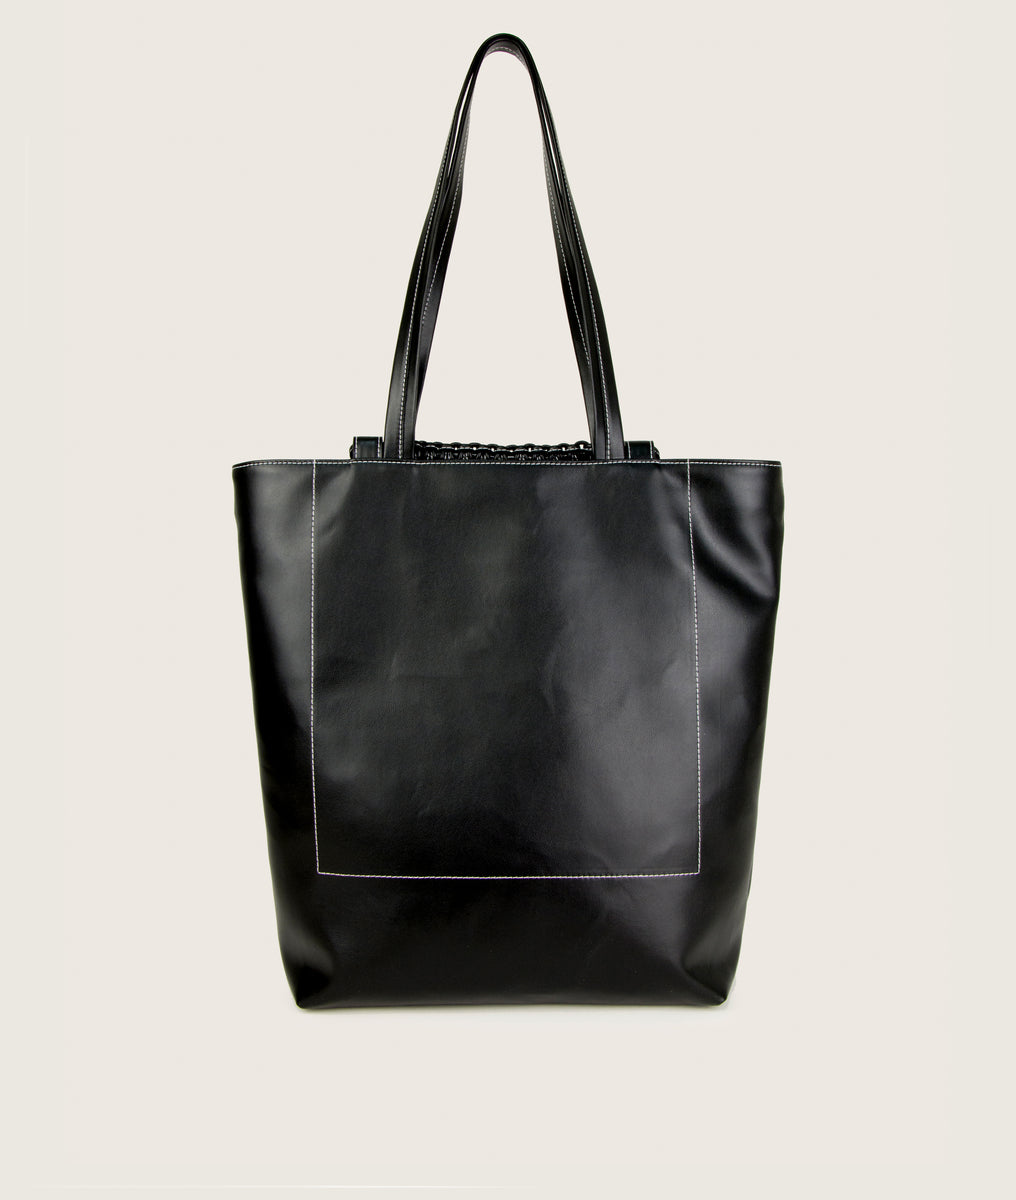 Pazar Book Tote Grape leather Black with white stitching